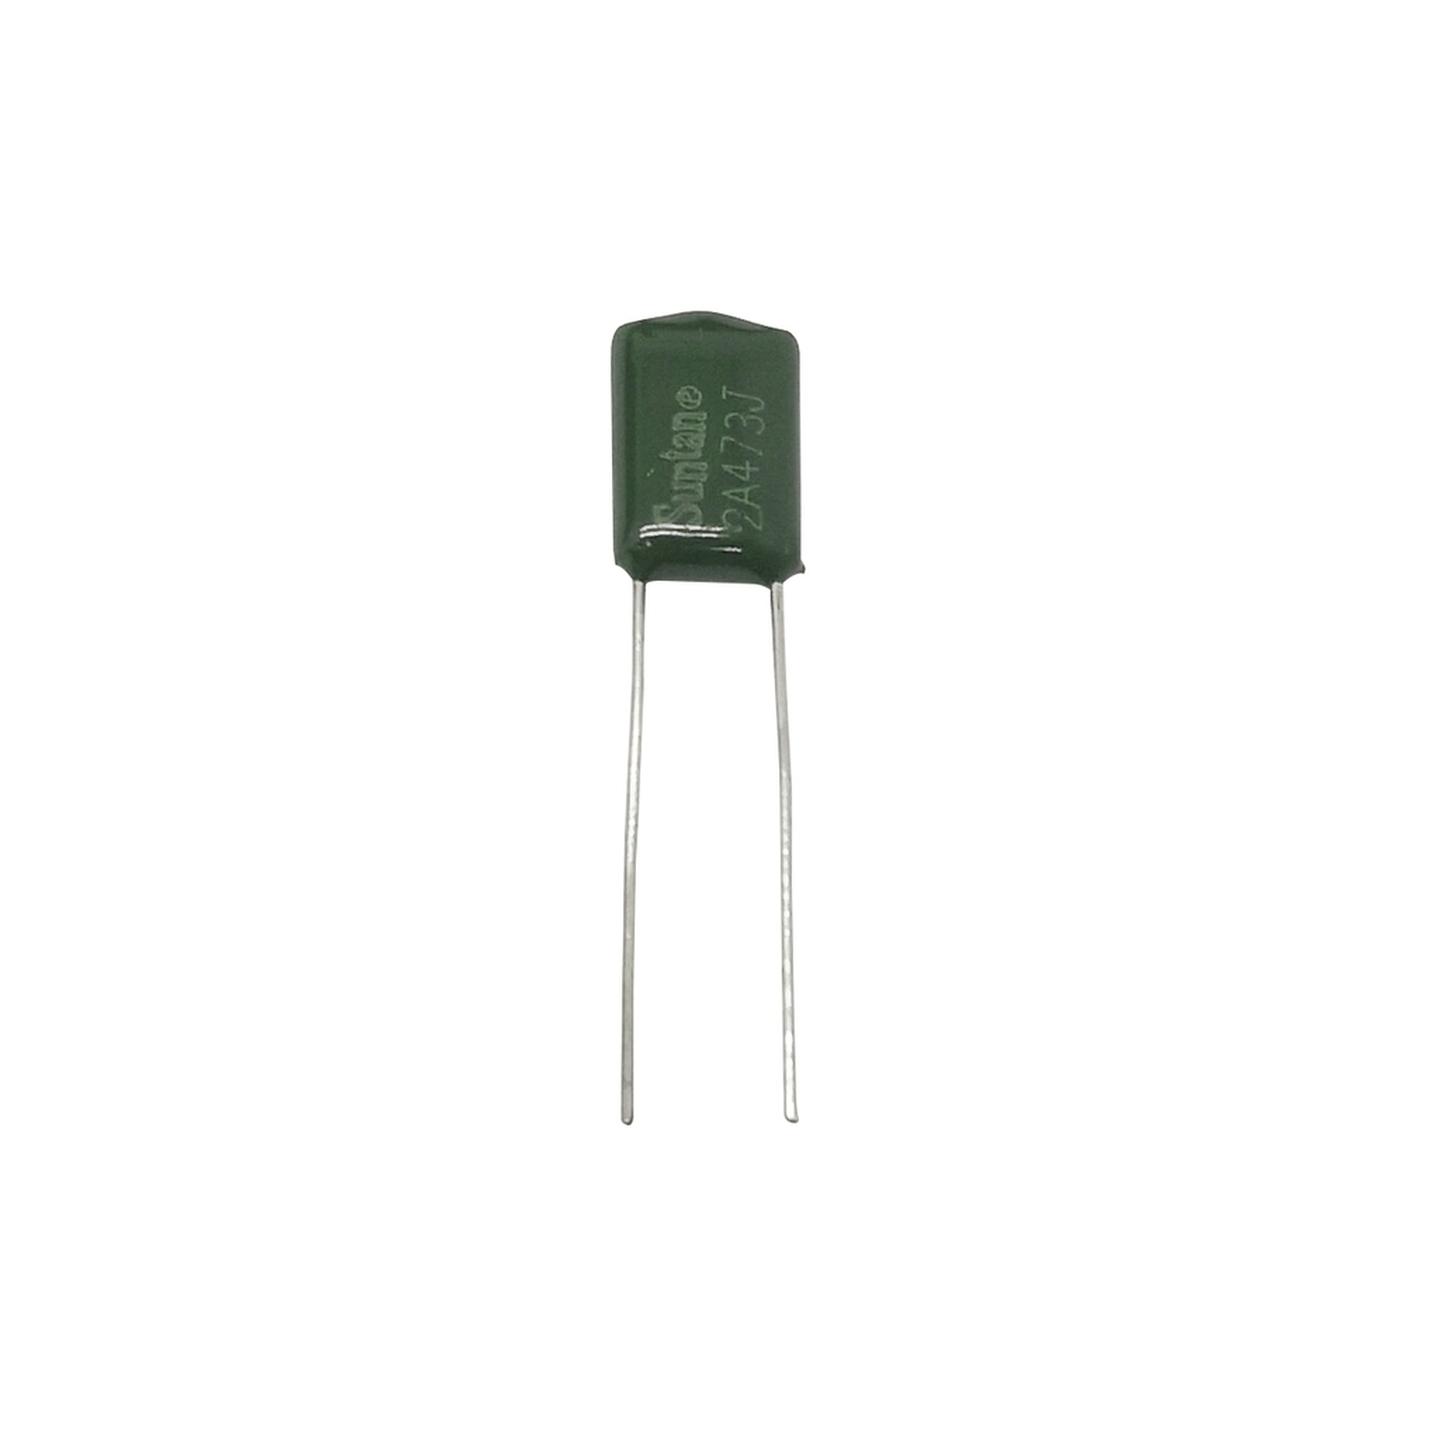 47nF 100VDC Polyester Capacitor